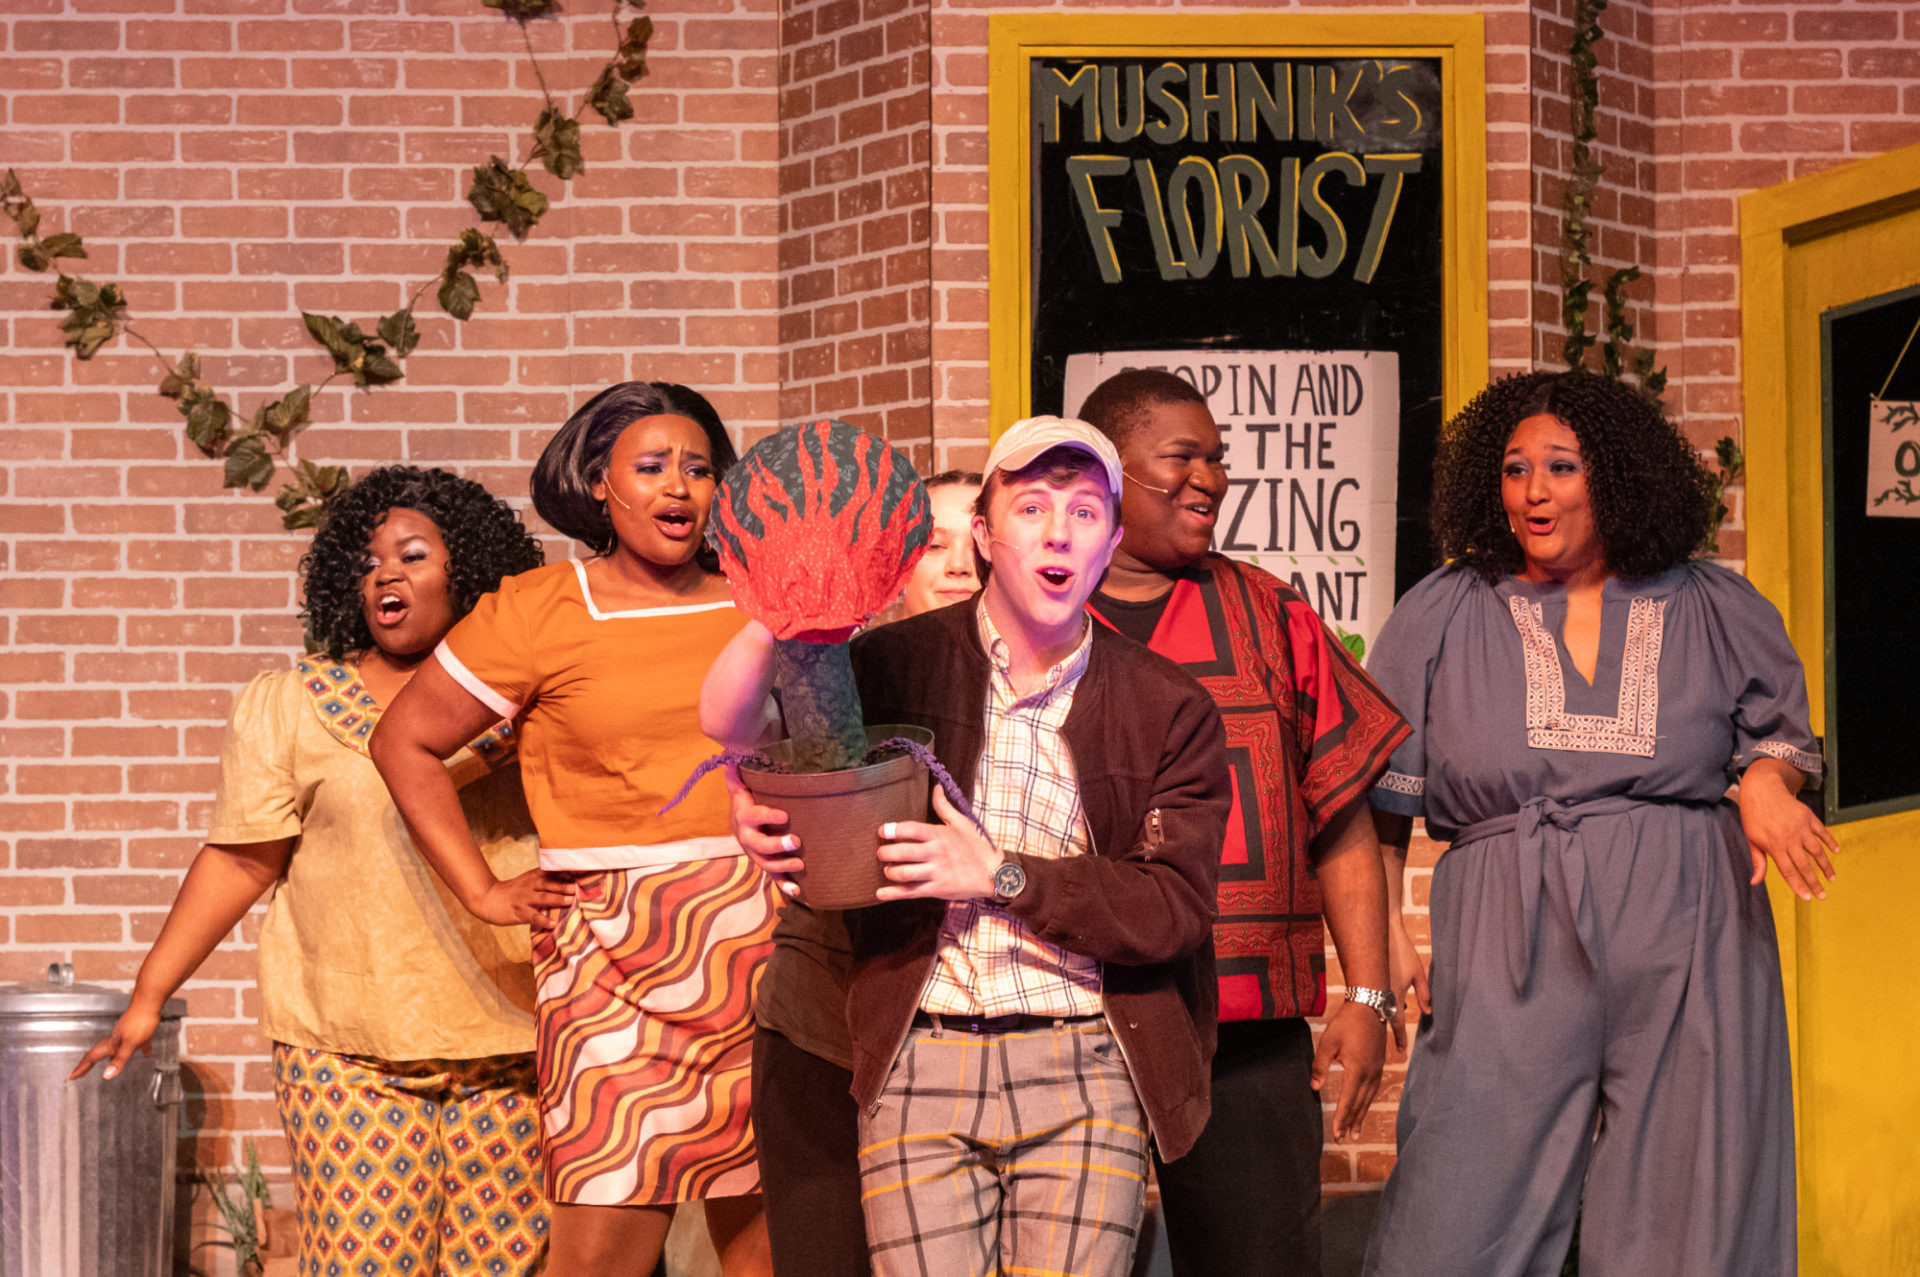 Photo of a white man holding a potted plant made of paper with a read flaming face on it. Behind him are four Black singers in beige, red, orange, and blue costumes on a stage set with the words Mushnik's Florist on a sign.